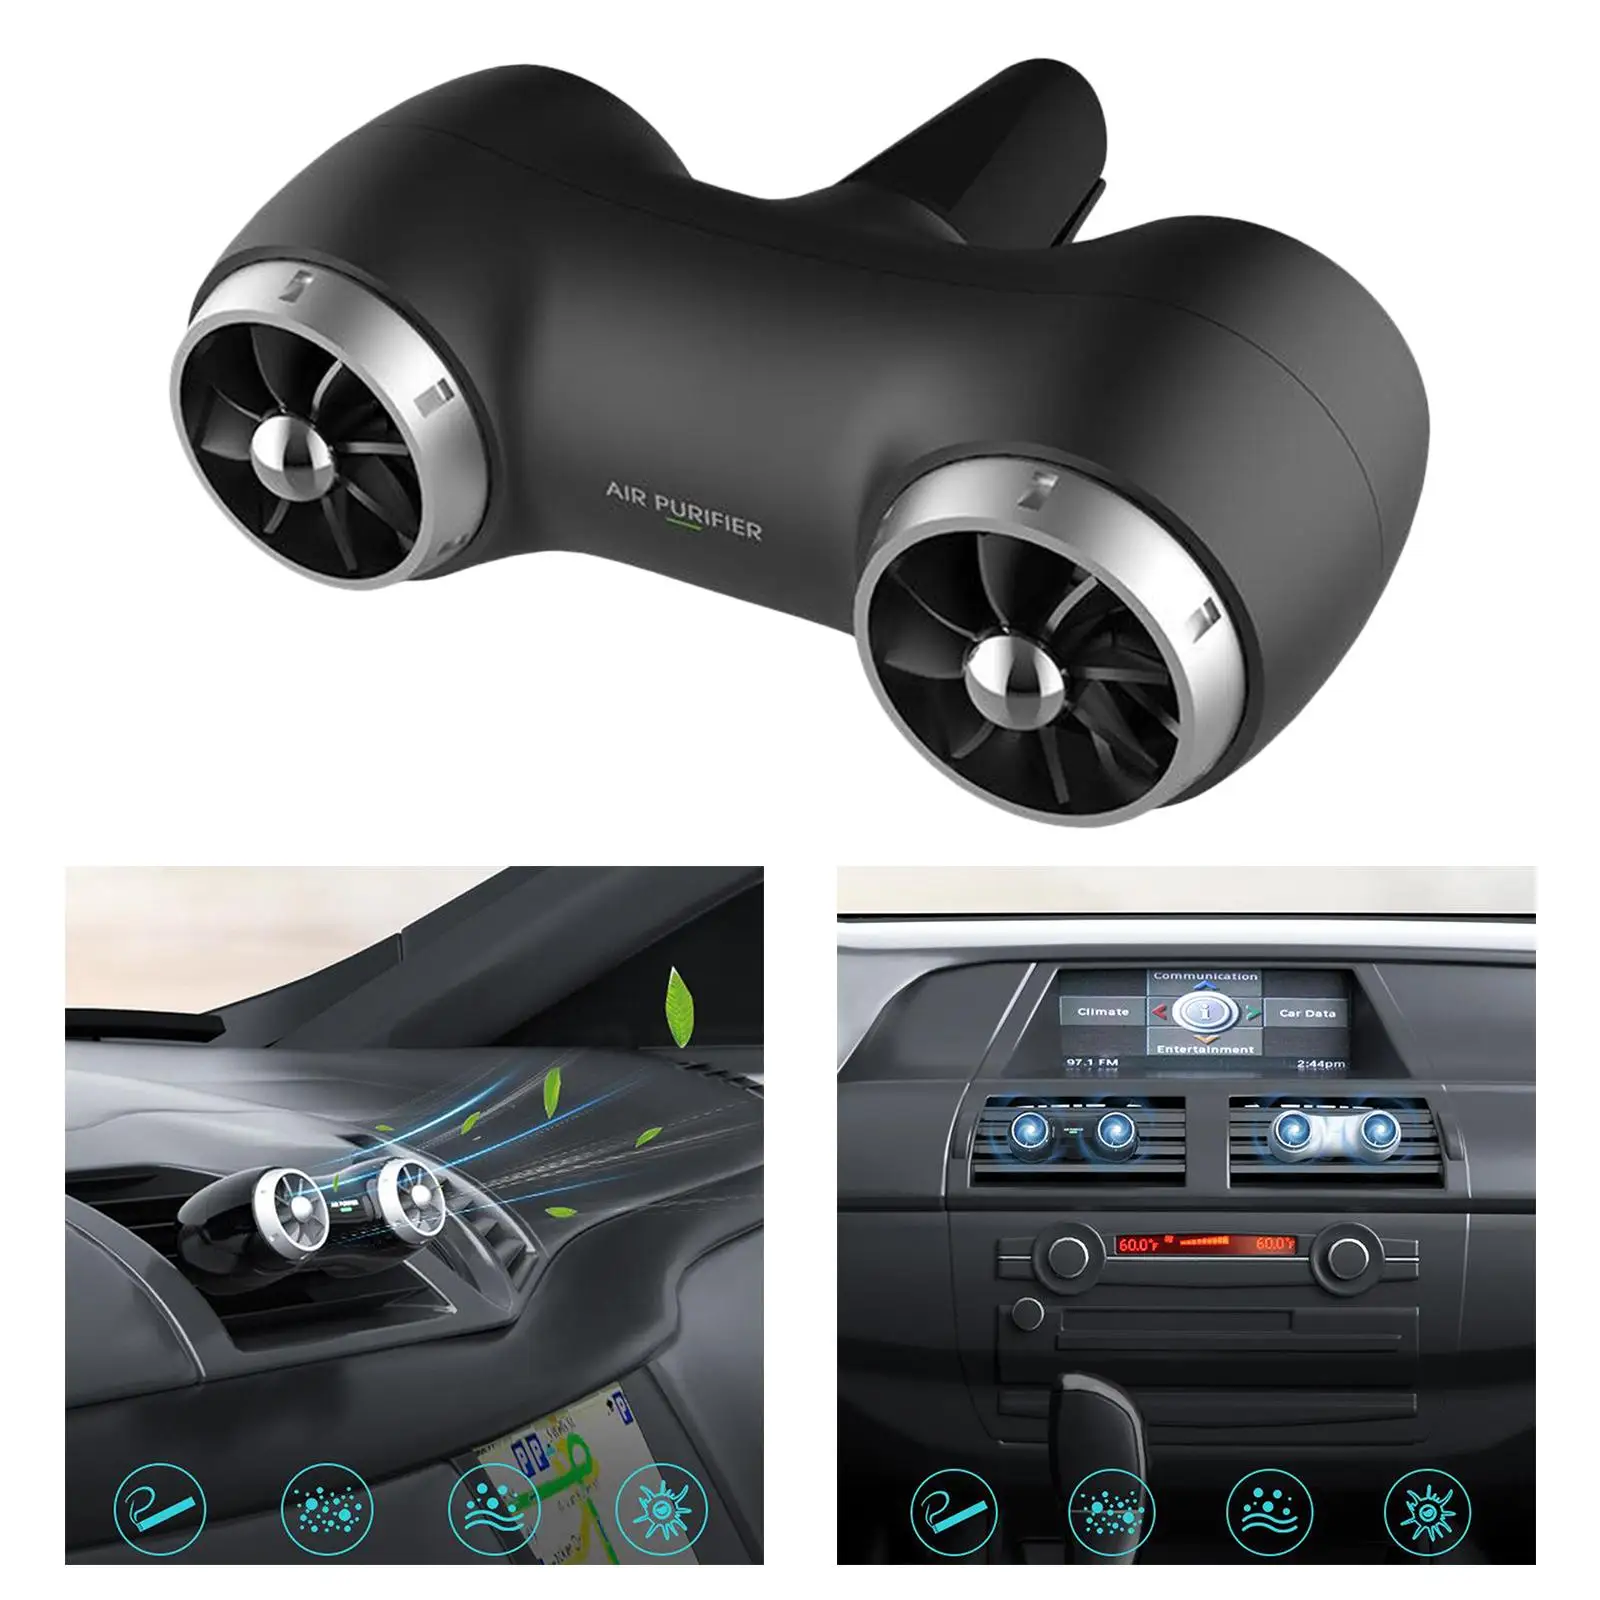 USB Charging Car Air Purifier, Portable Vehicles Ionizer Air Cleaner for Automobile, Small Room, Negative ion Air Purification